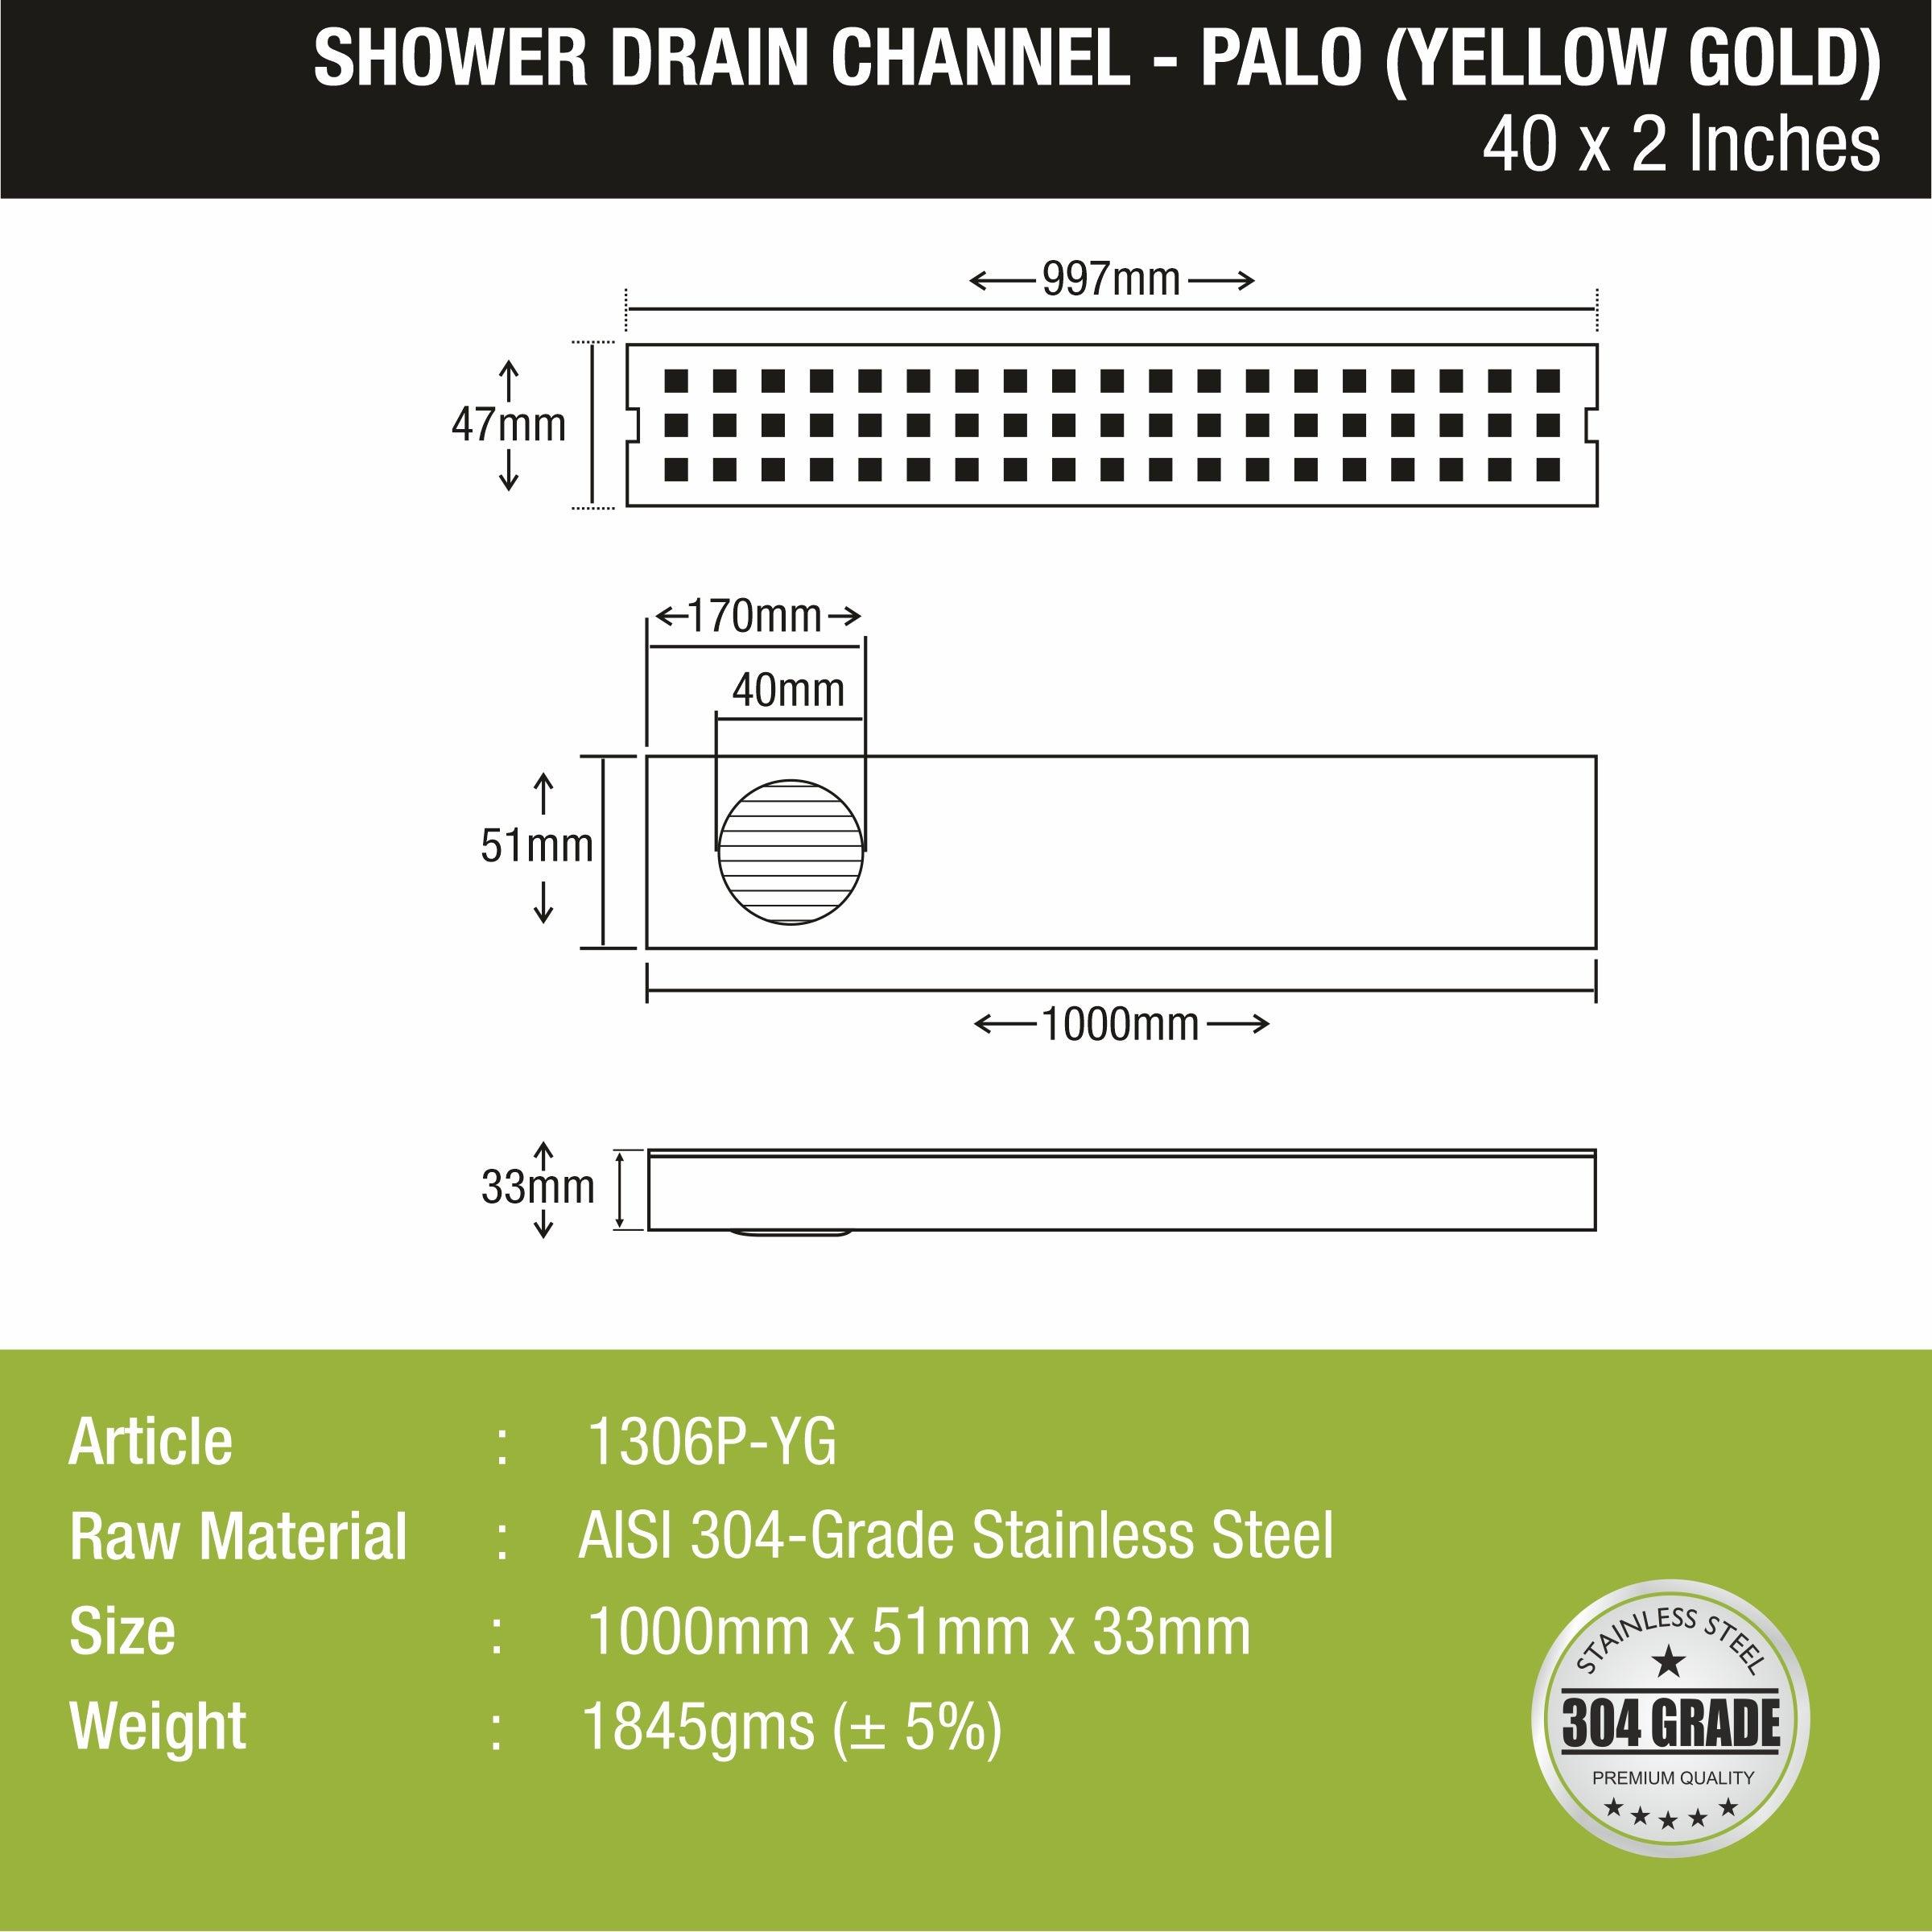 Palo Shower Drain Channel - Yellow Gold (40 x 2 Inches) sizes and dimensions